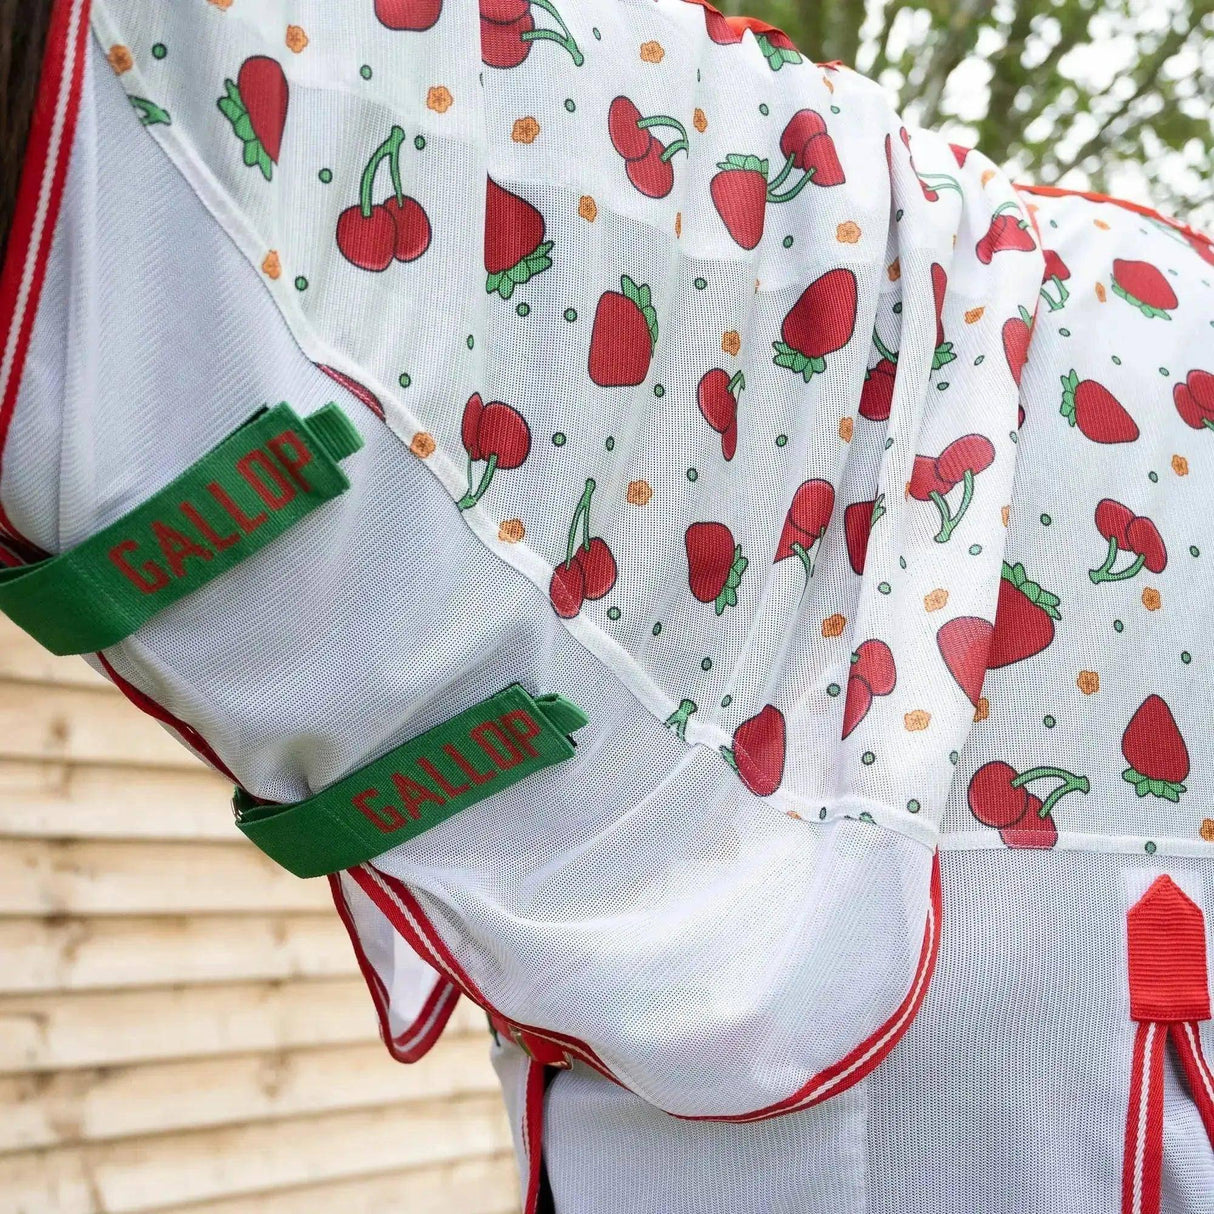 Gallop Berries & Cherries Combo Fly Rug 4'6 Gallop Equestrian Fly Rugs Barnstaple Equestrian Supplies